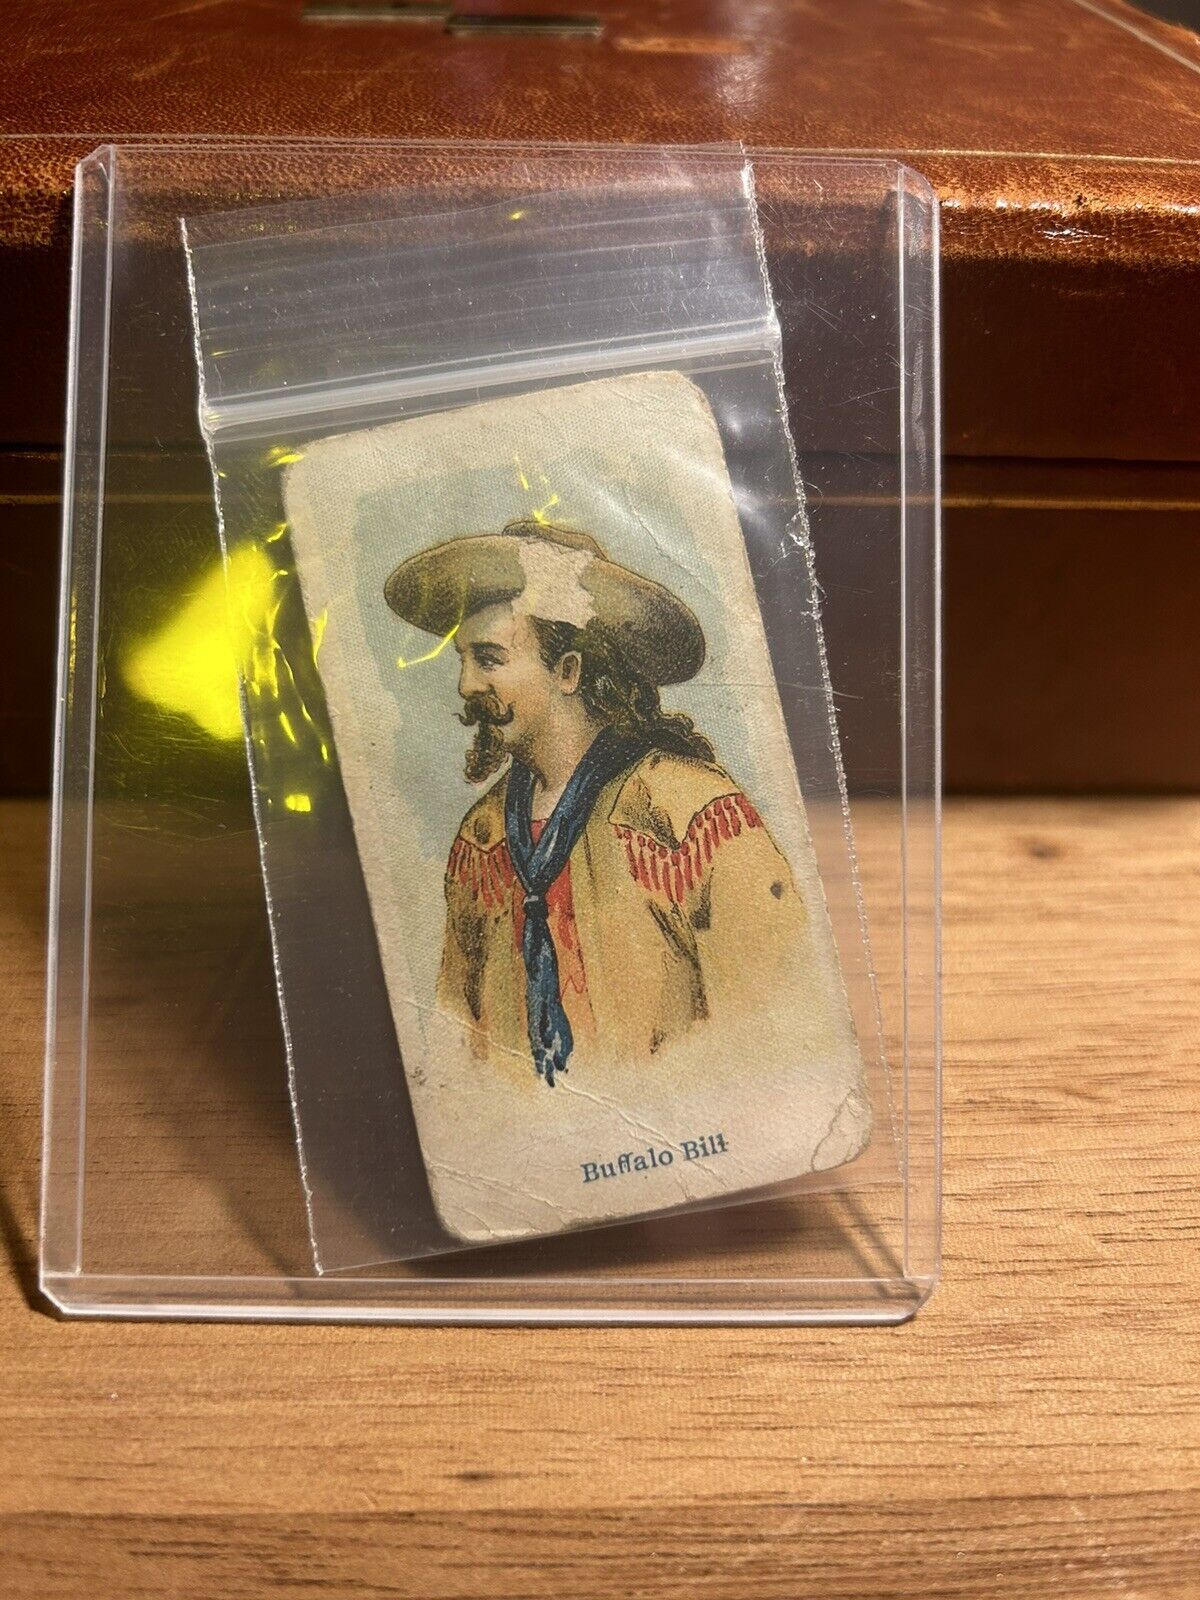 Wild West Caramel Cards  BUFFALO BILL  - Attic Find - Collectable - Rare